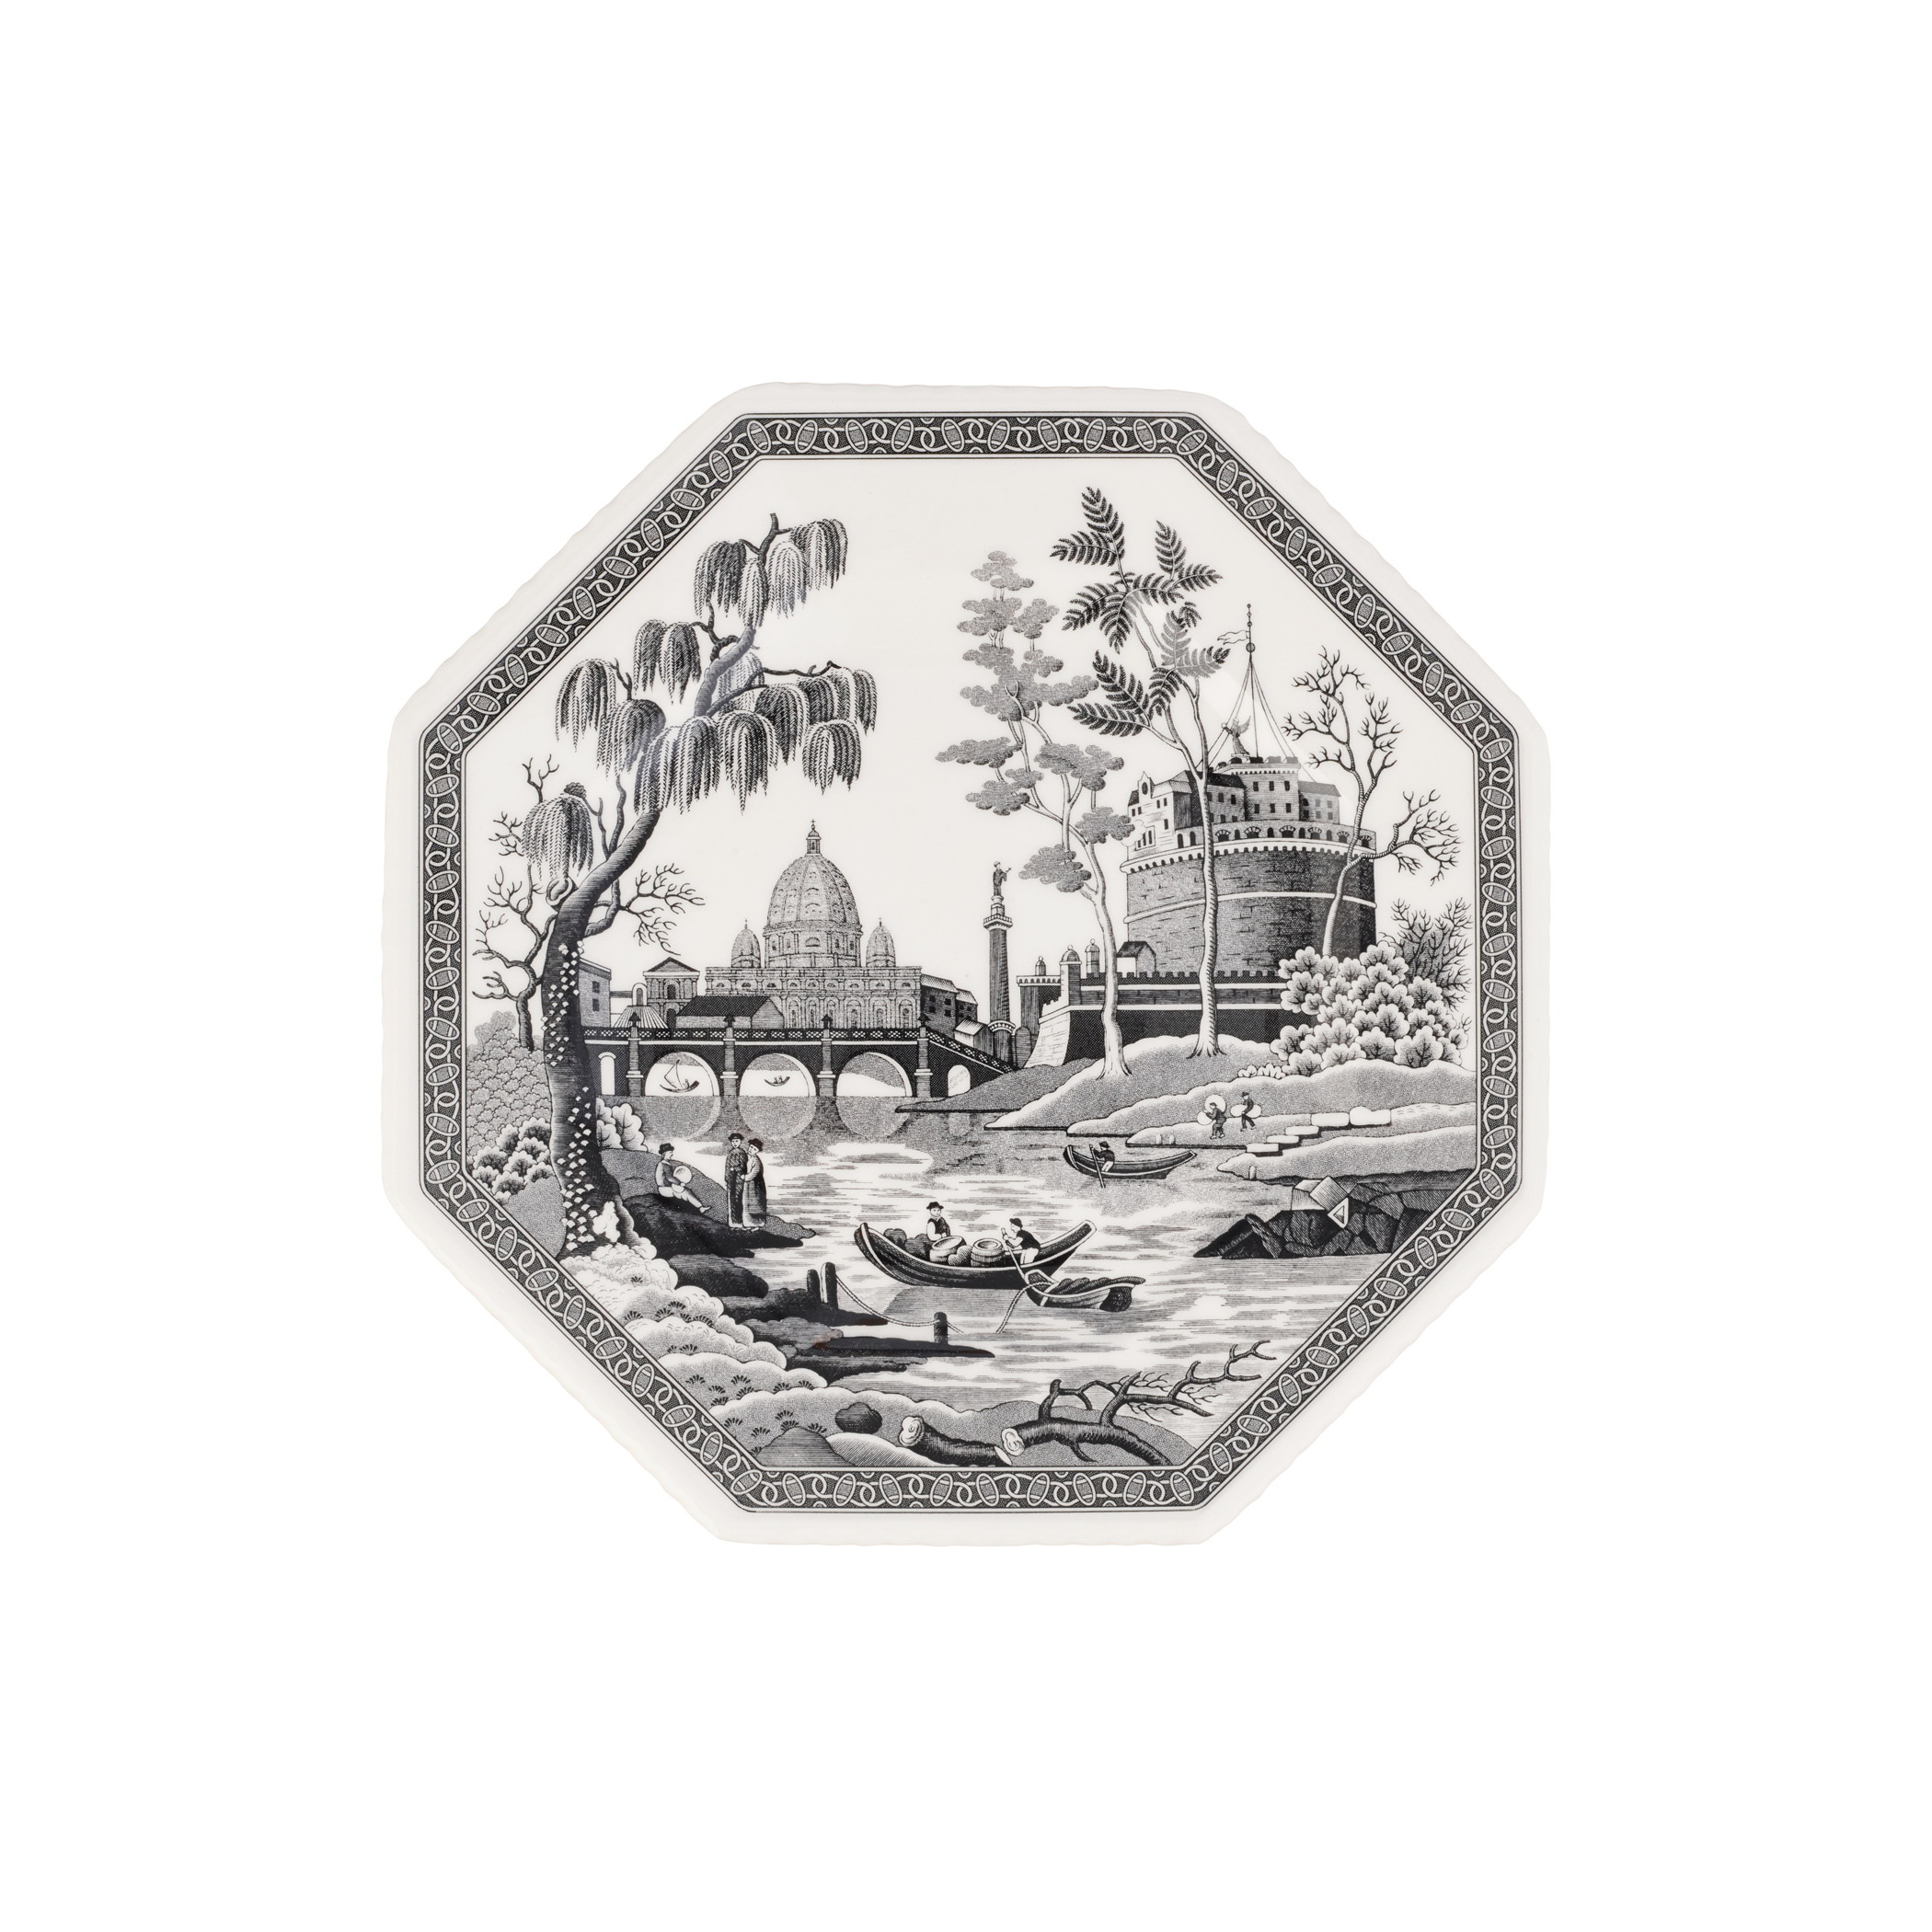 Heritage Octagonal Plate 9.5 Inch, Rome image number null